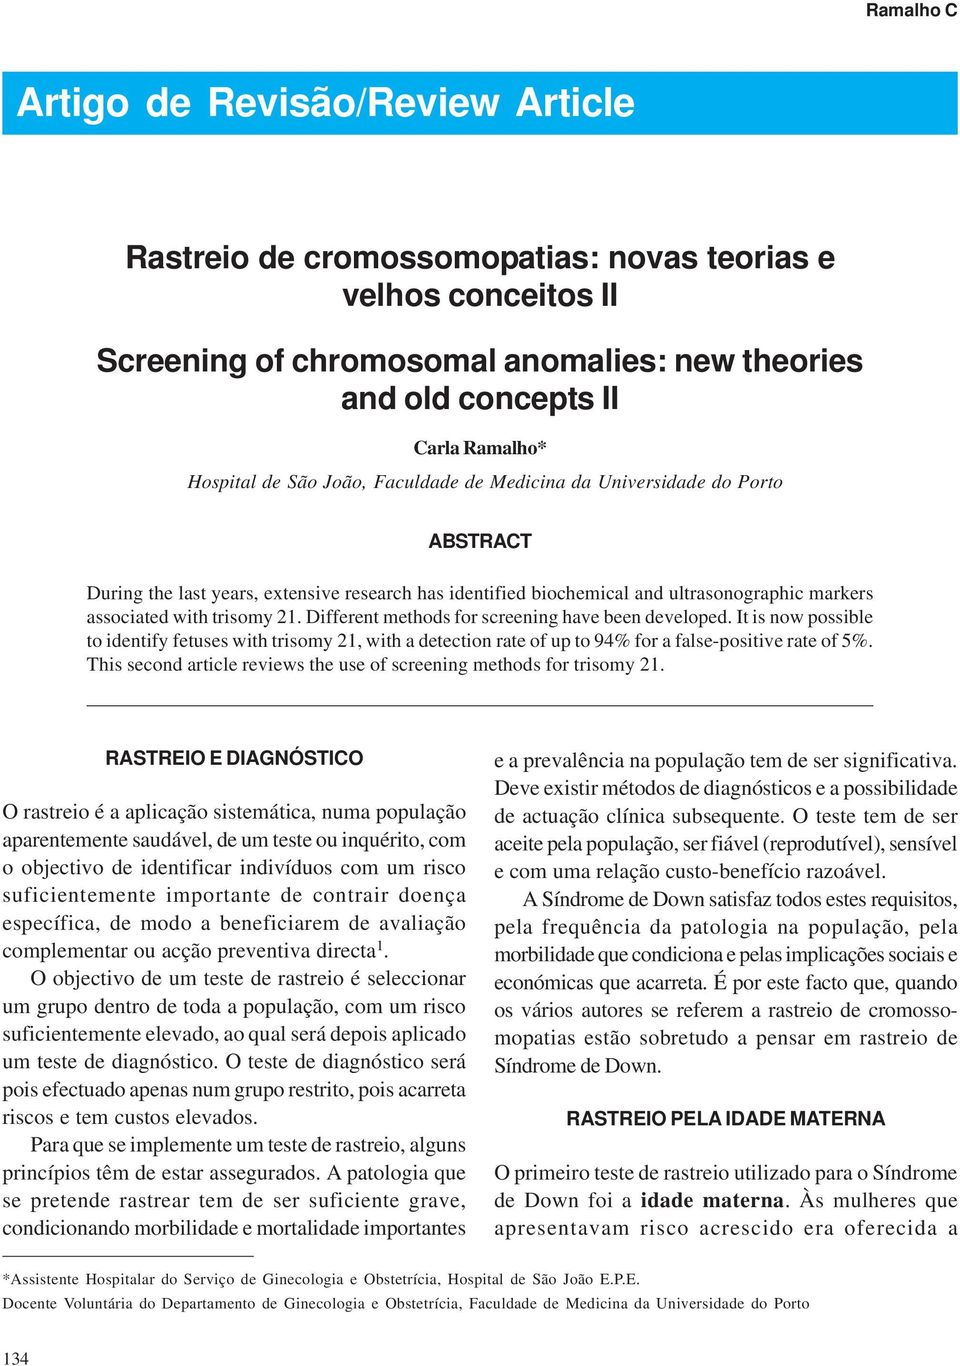 Different methods for screening have been developed. It is now possible to identify fetuses with trisomy 21, with a detection rate of up to 94% for a false-positive rate of 5%.